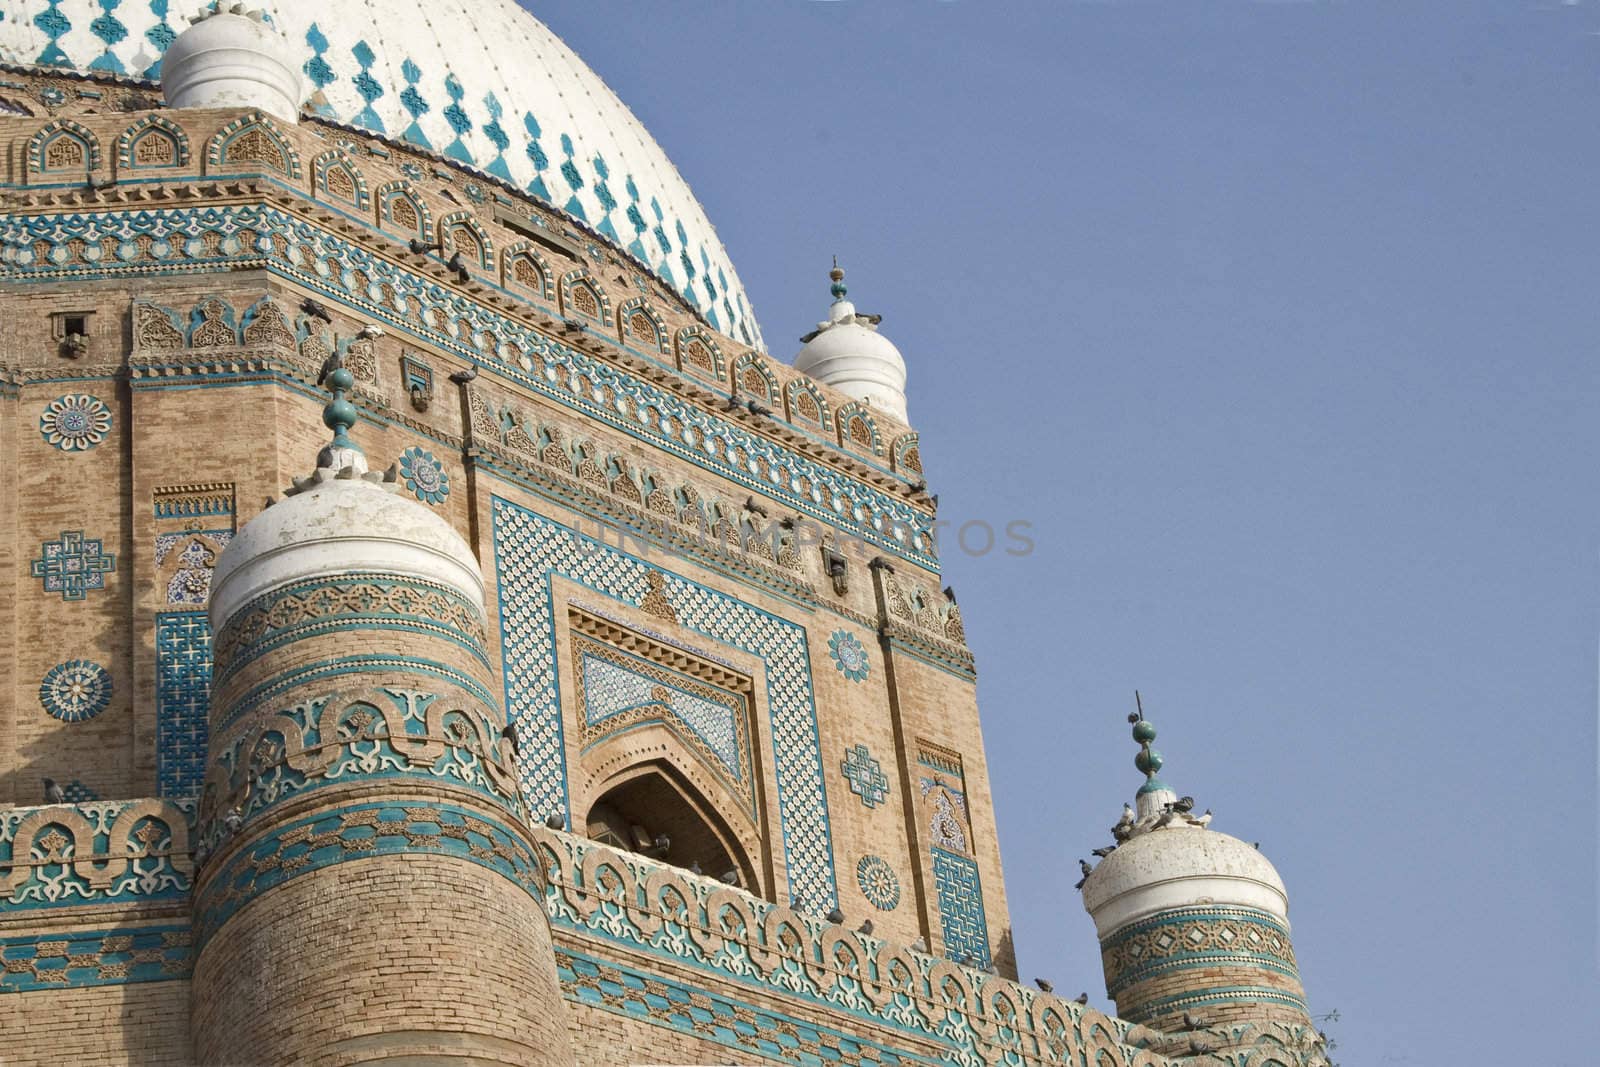 Close up on tomb of Shah Rukn-e-Alam by haiderazim